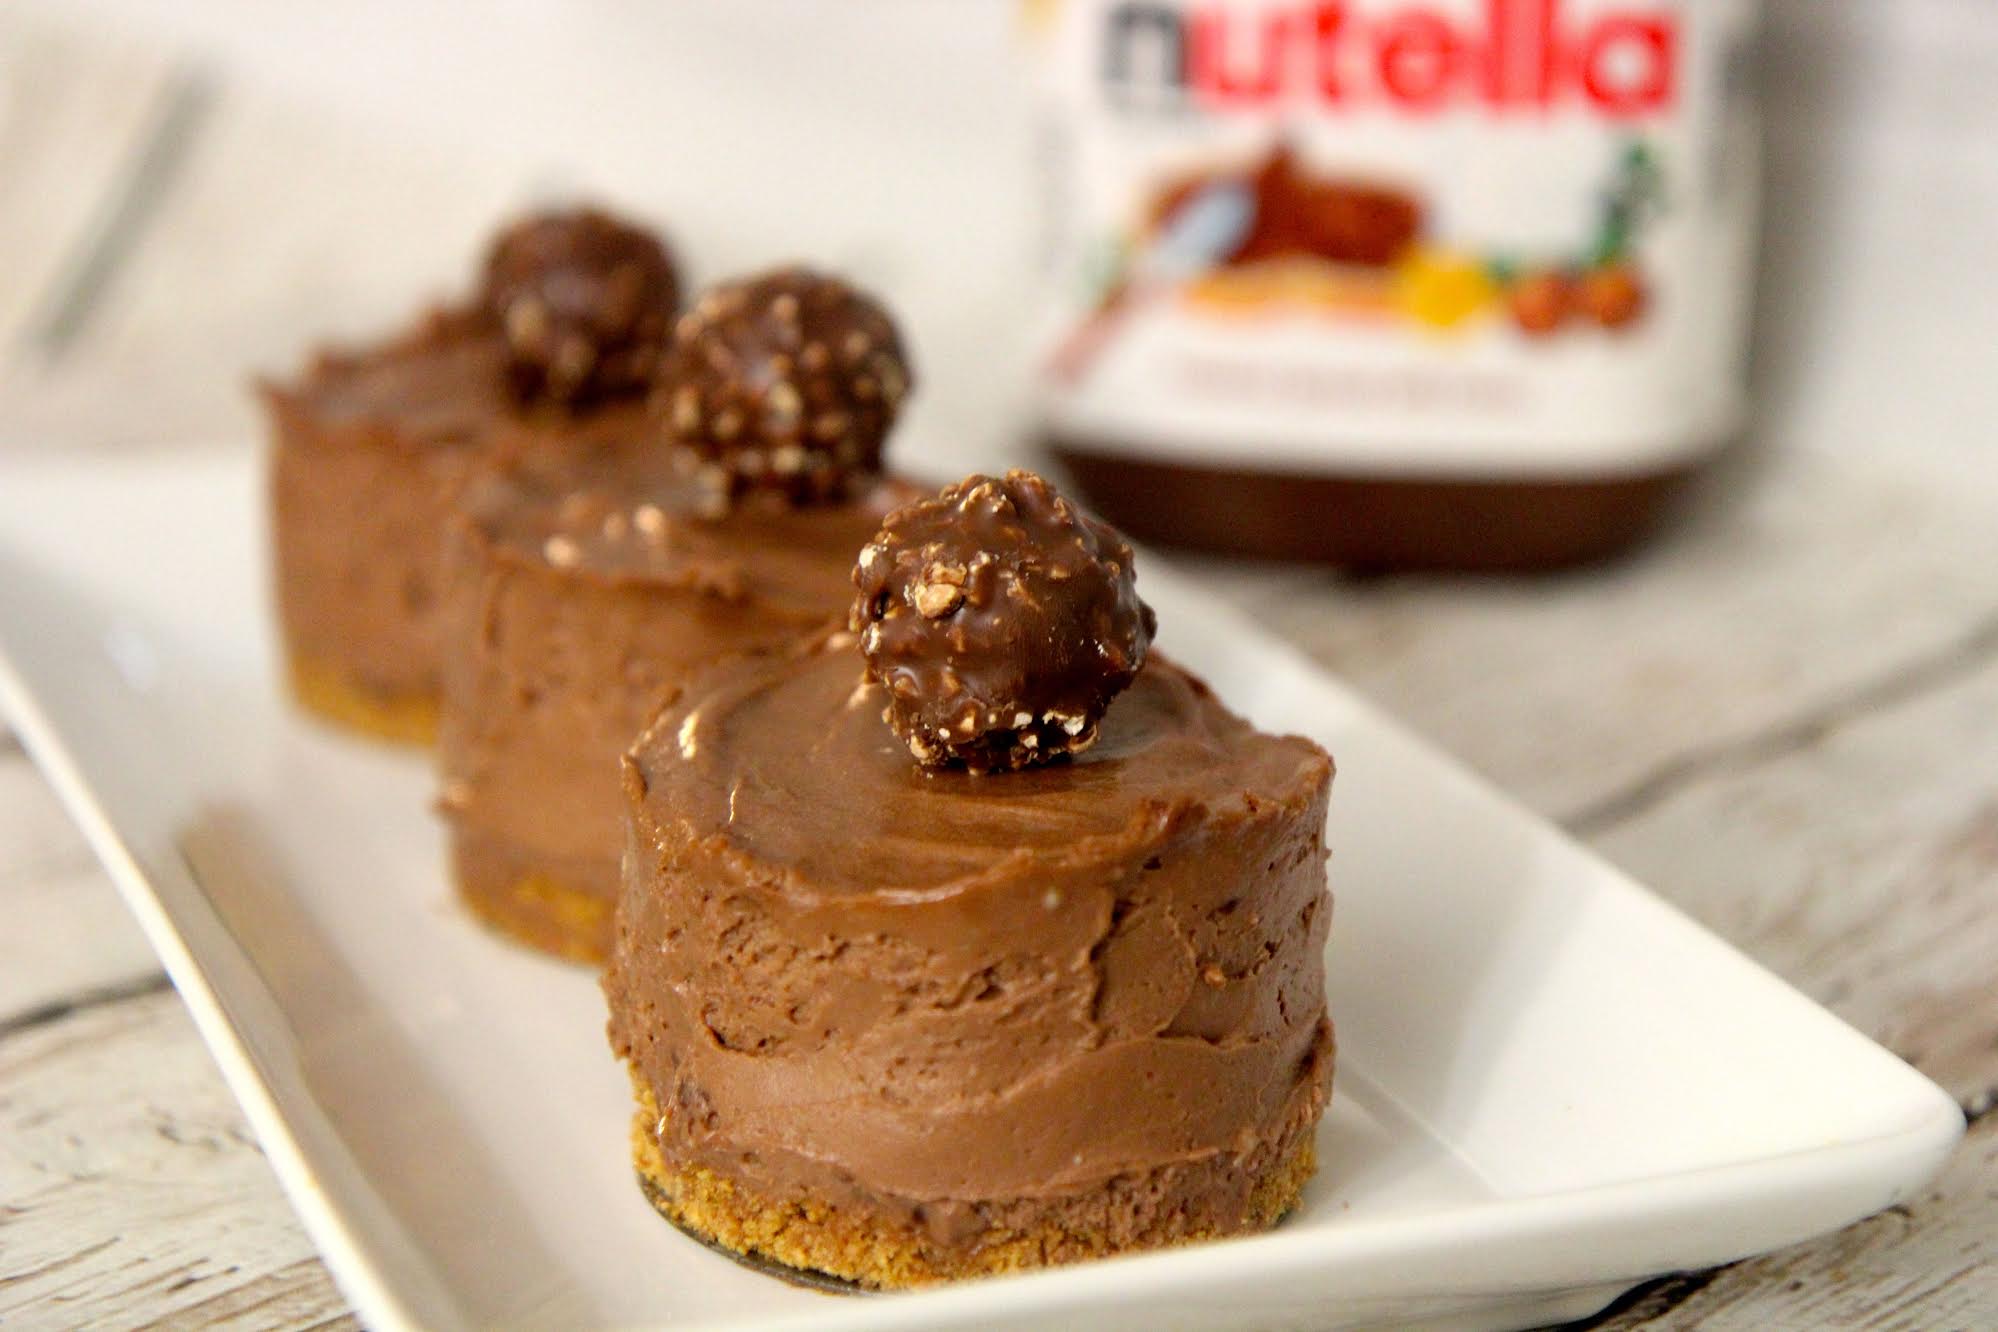 Chocolate, Nutella, and creamcheese are all you need for these simple no-bake Nutella cheesecakes